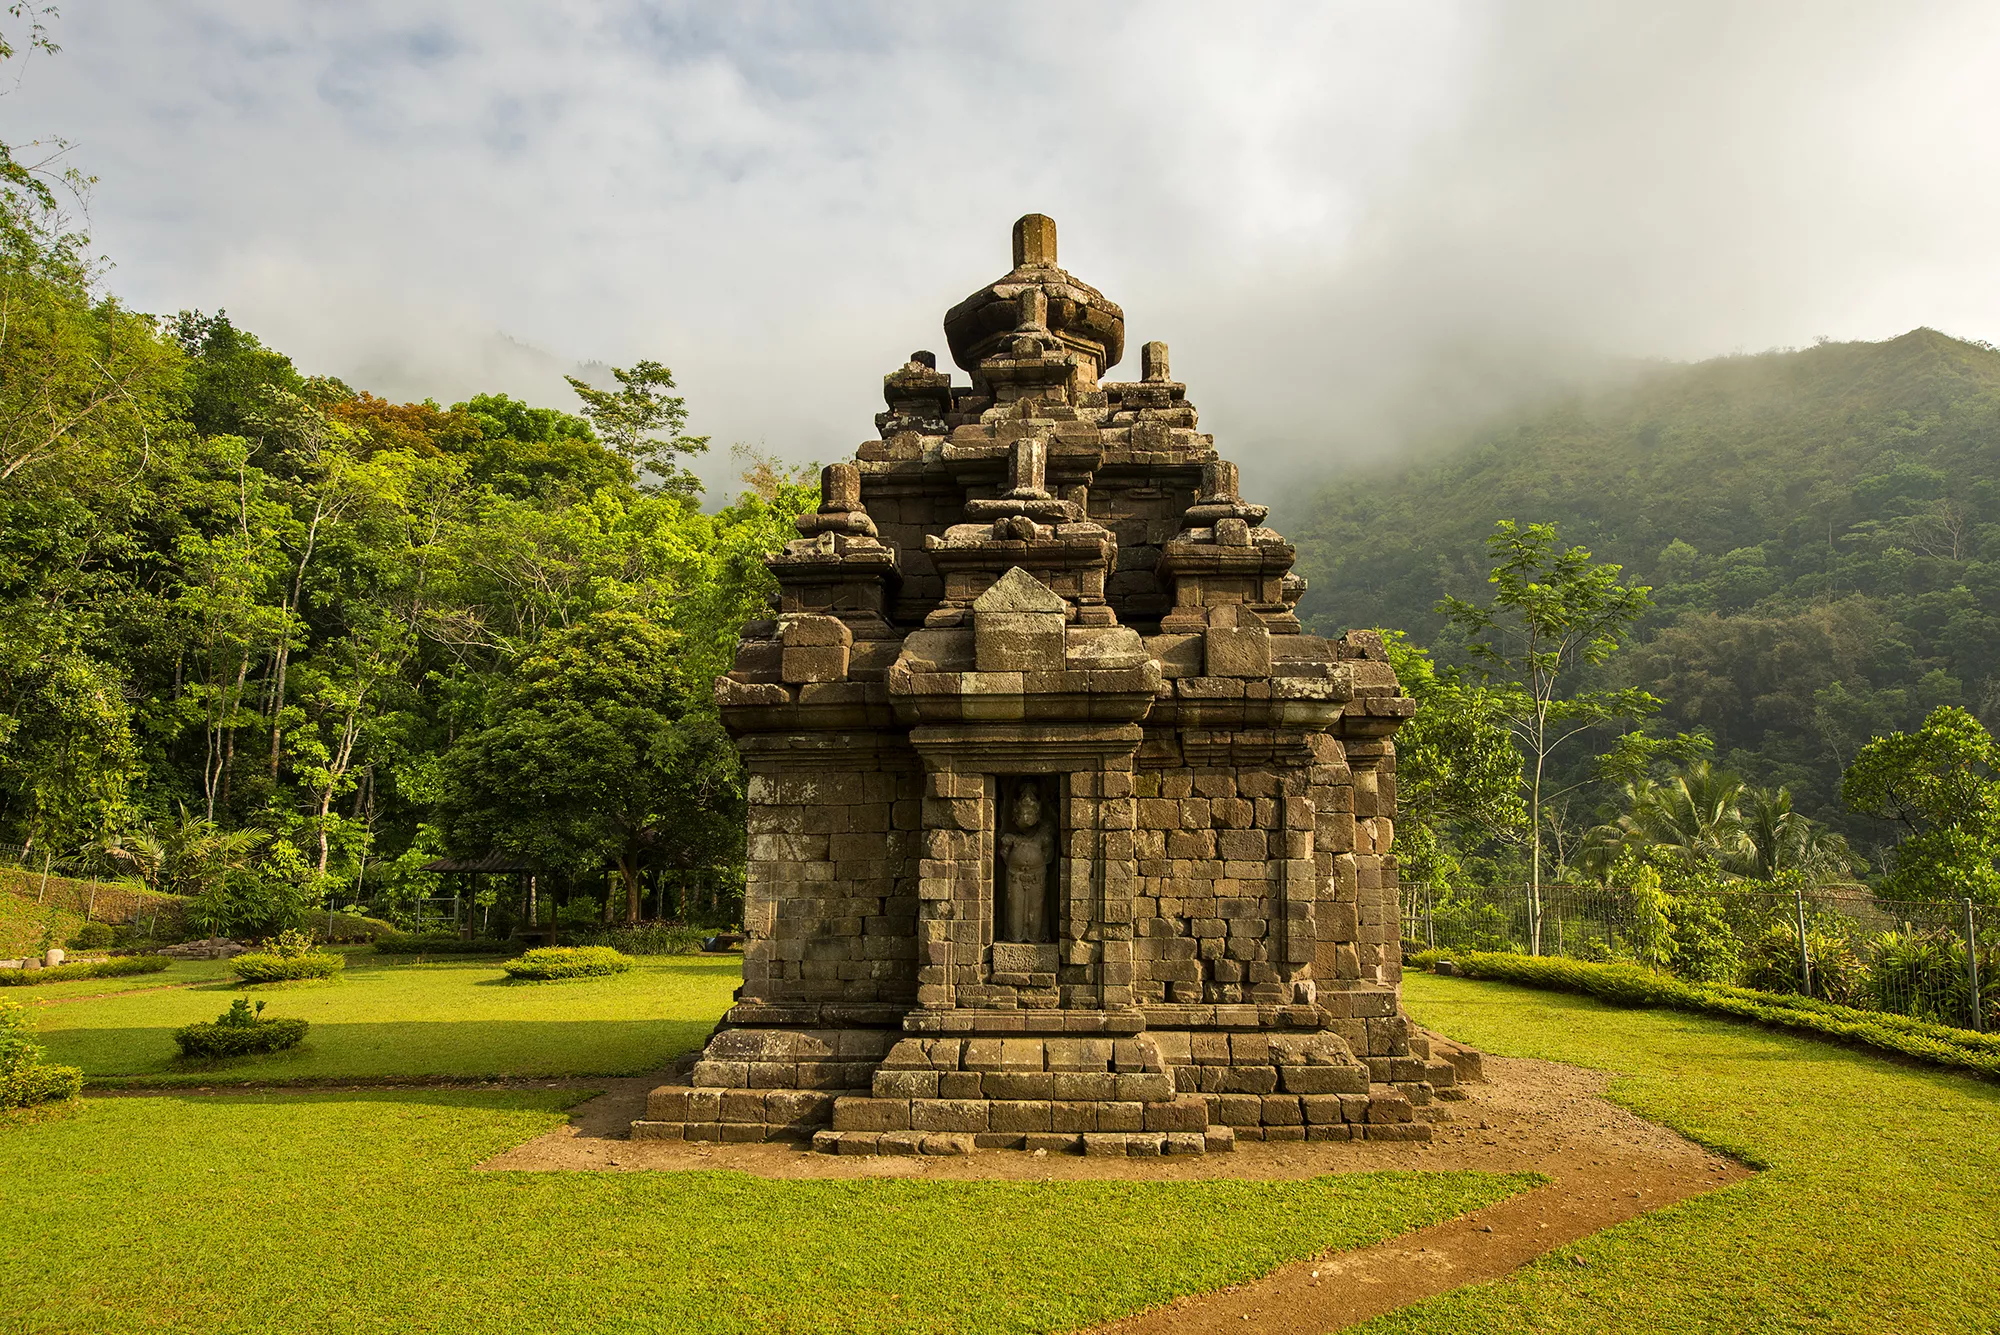 Selogriyo Temple in Indonesia, Central Asia | Architecture,Trekking & Hiking - Rated 3.5